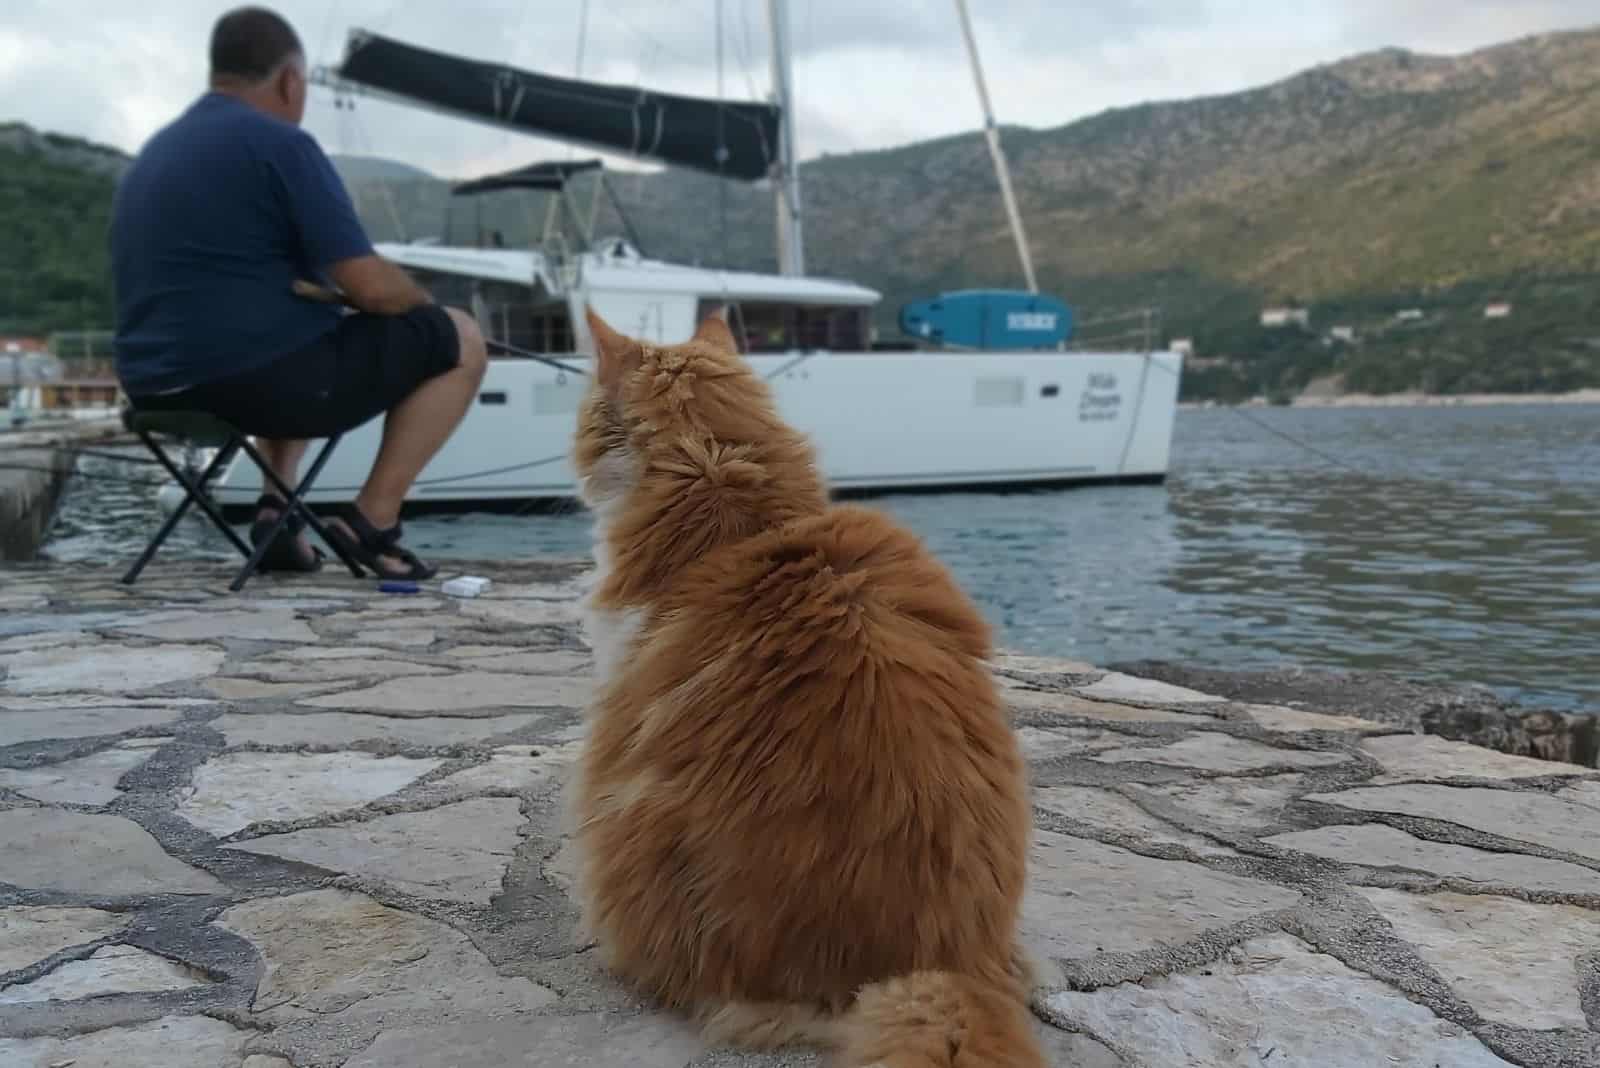 the cat sits by the sea and watches the fisherman fishing